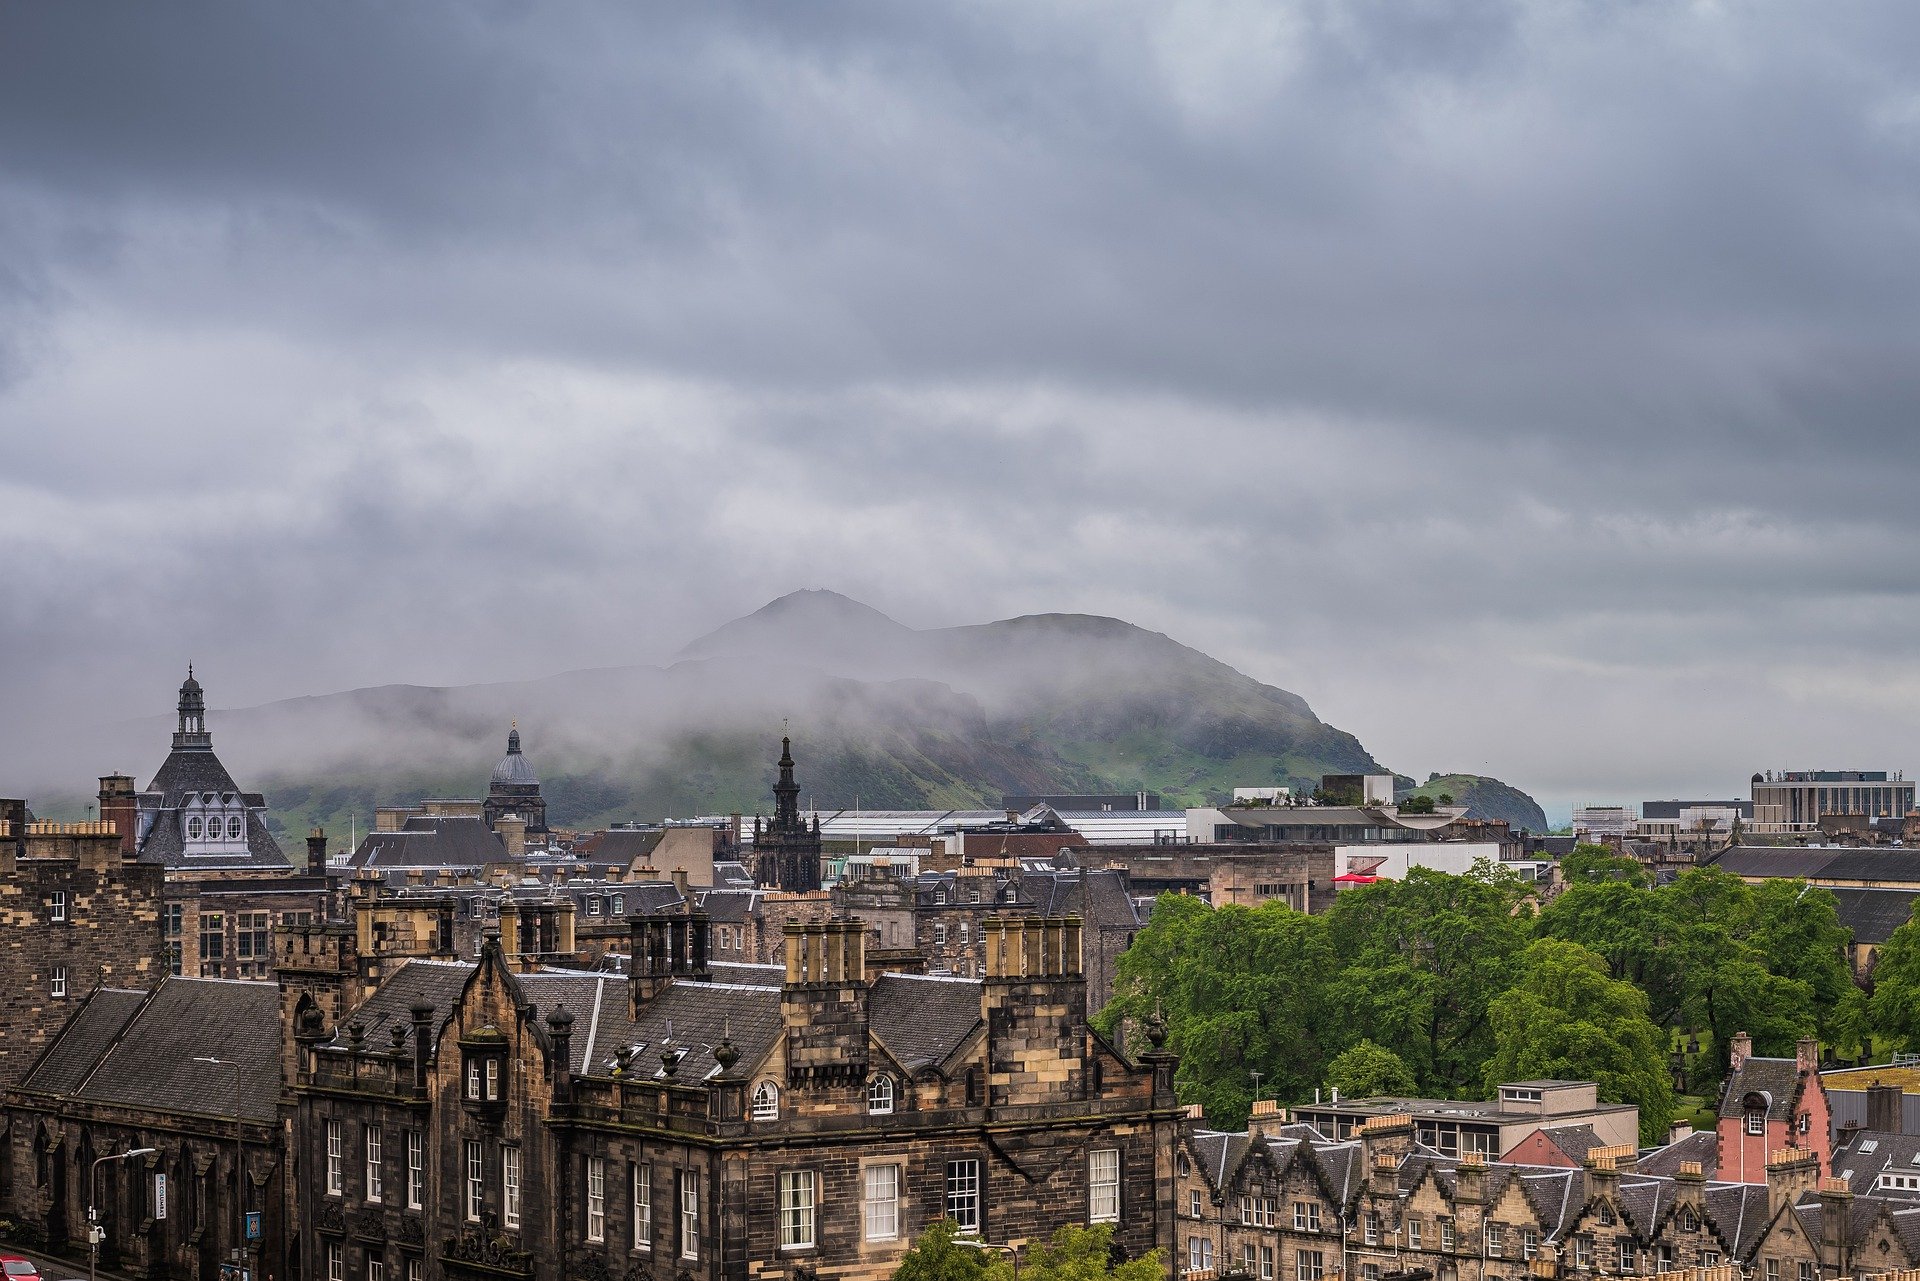 New homeowners in Edinburgh are most likely to be impacted by rising mortgage interest rates